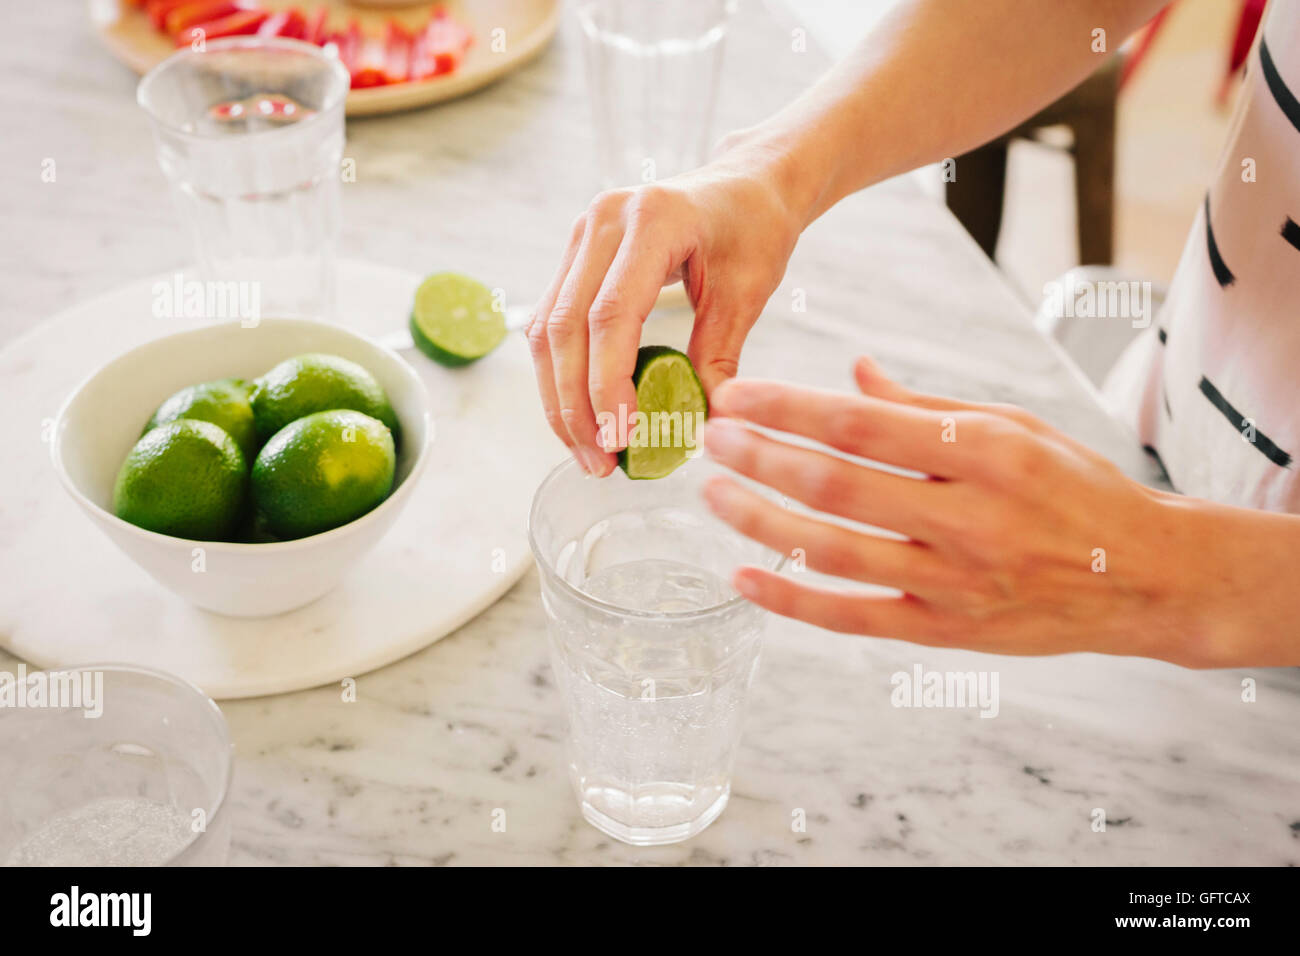 A woman squeezing fresh limes into a glass of water Stock Photo